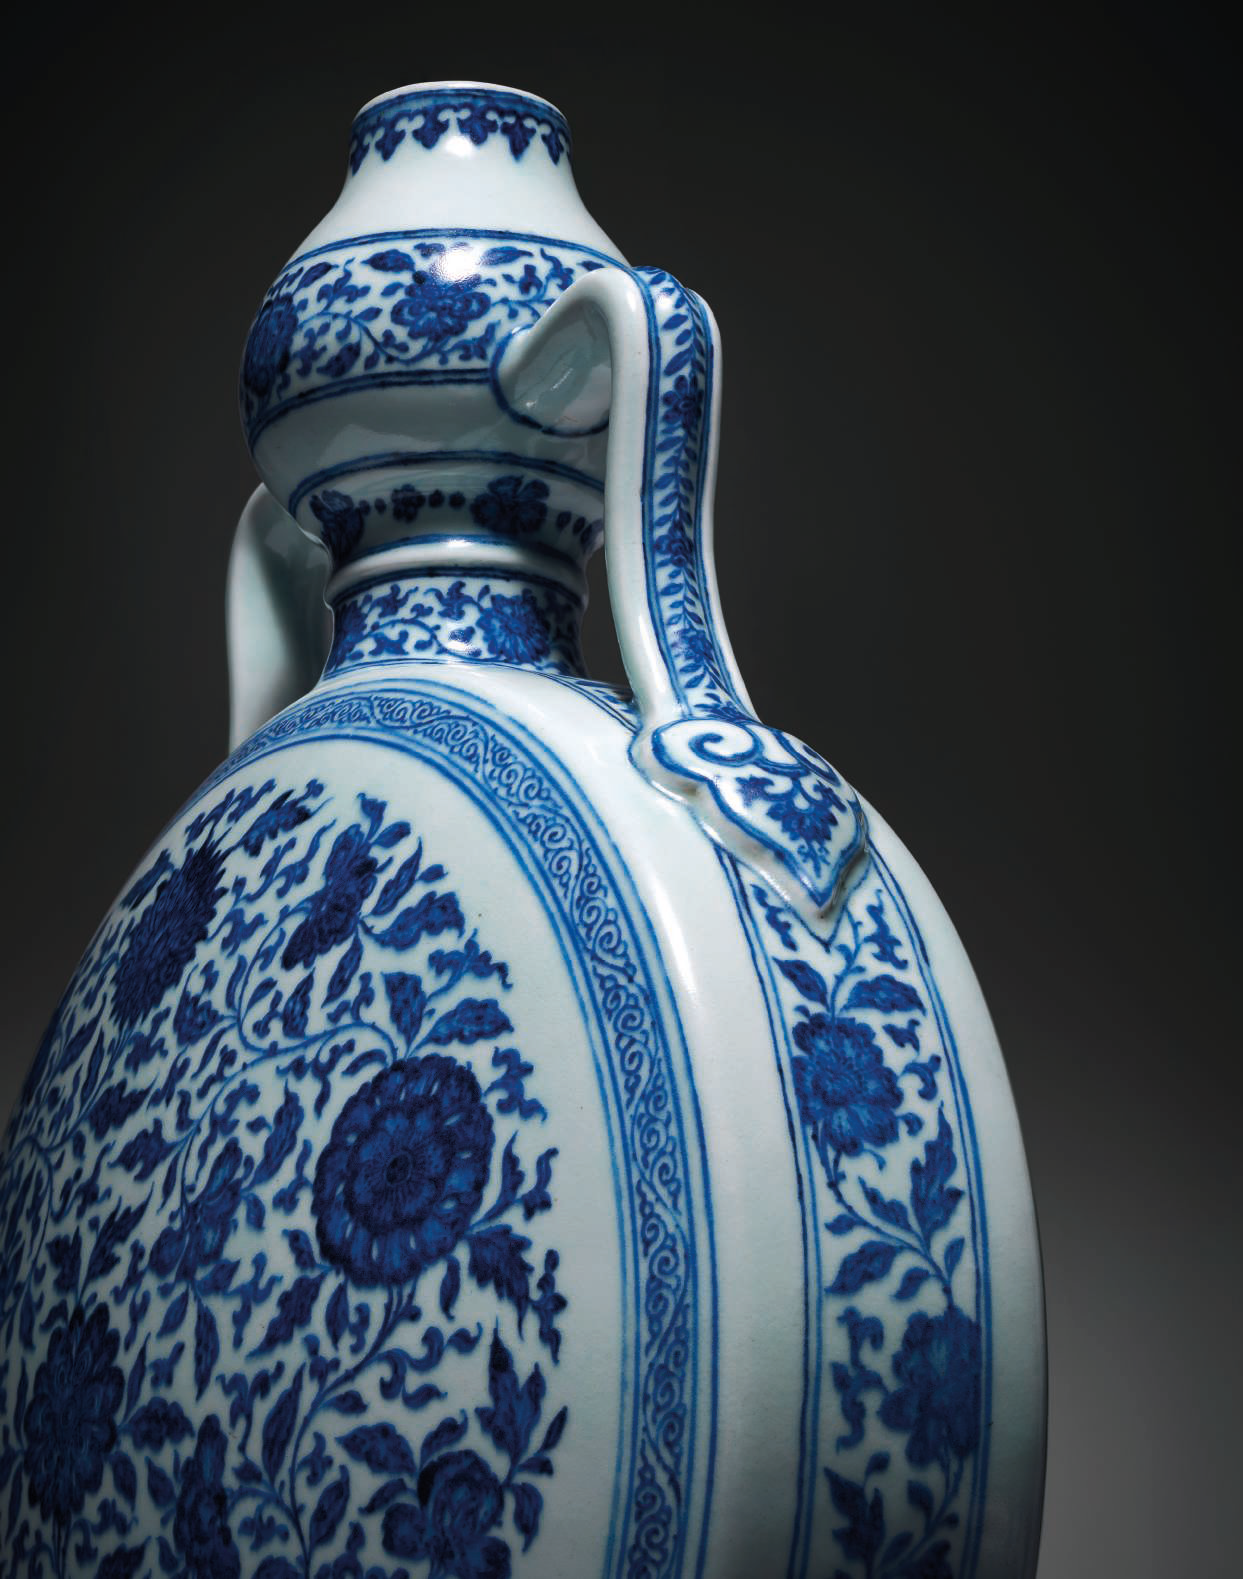 Christie's announces highlights from the Fine Chinese Ceramics